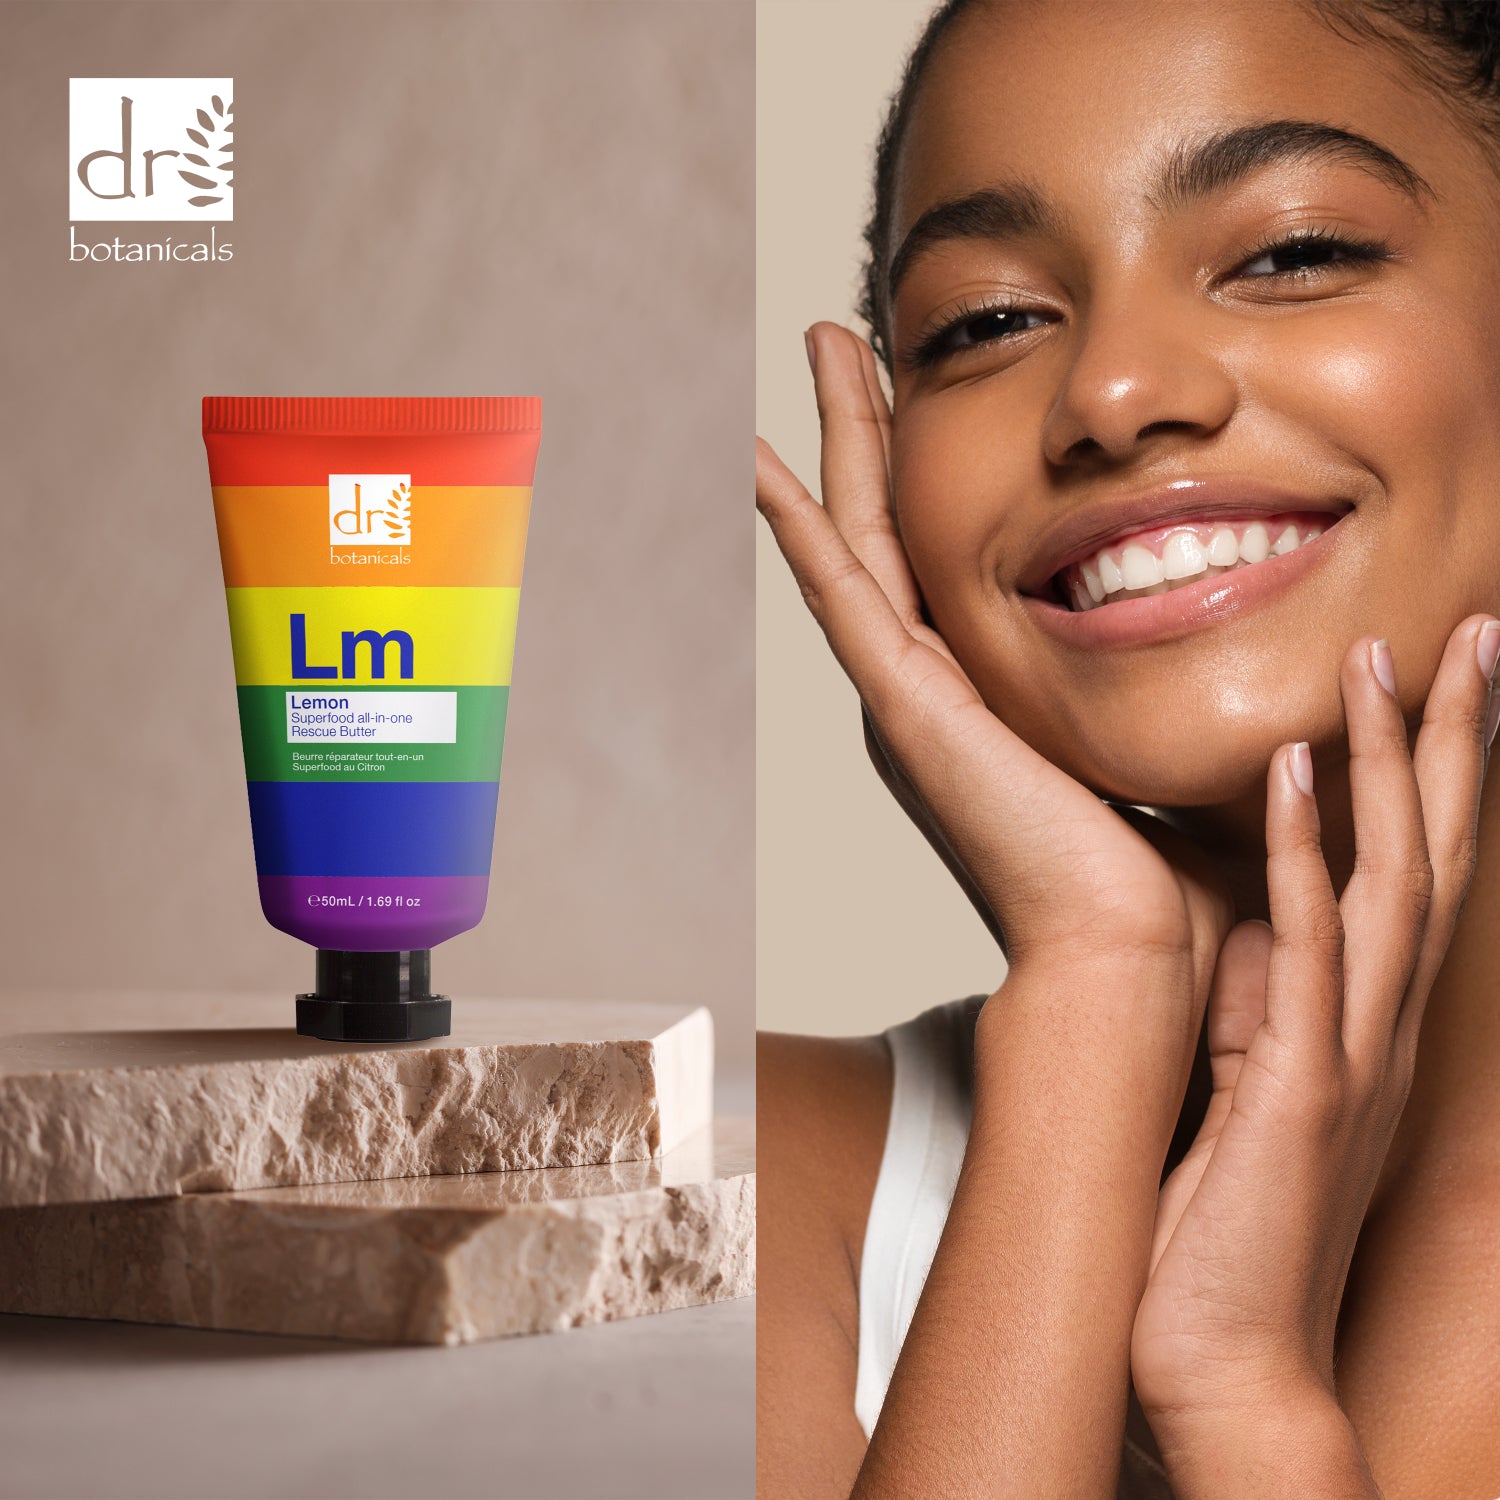 Pride Edition Lemon Superfood All-In-One Rescue Butter 50ml